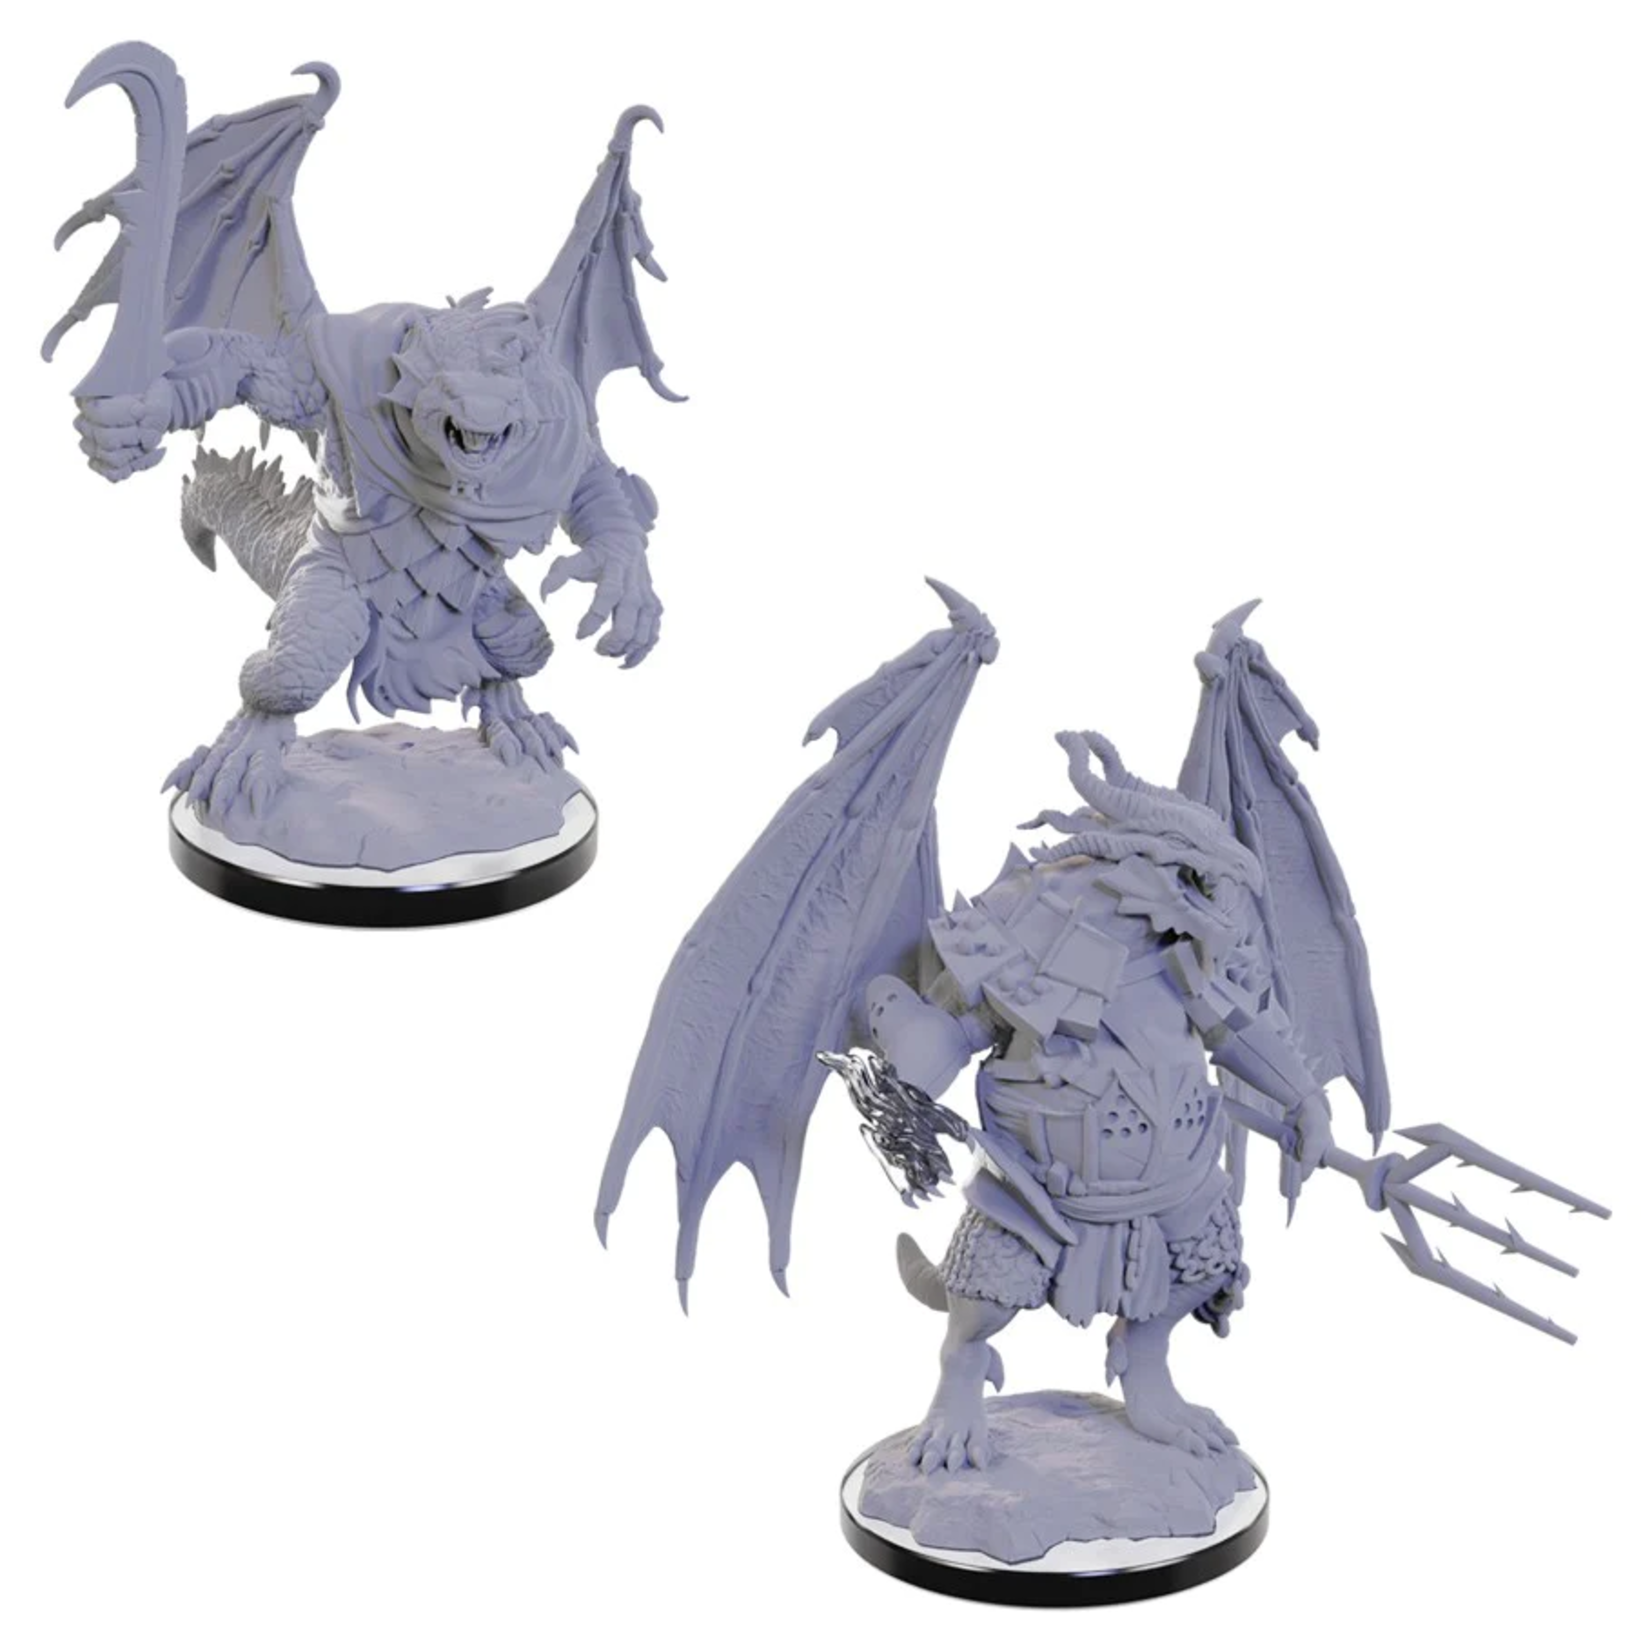 WizKids Dungeons and Dragons Nolzur's Marvelous Minis Draconian Mage and Foot Soldier